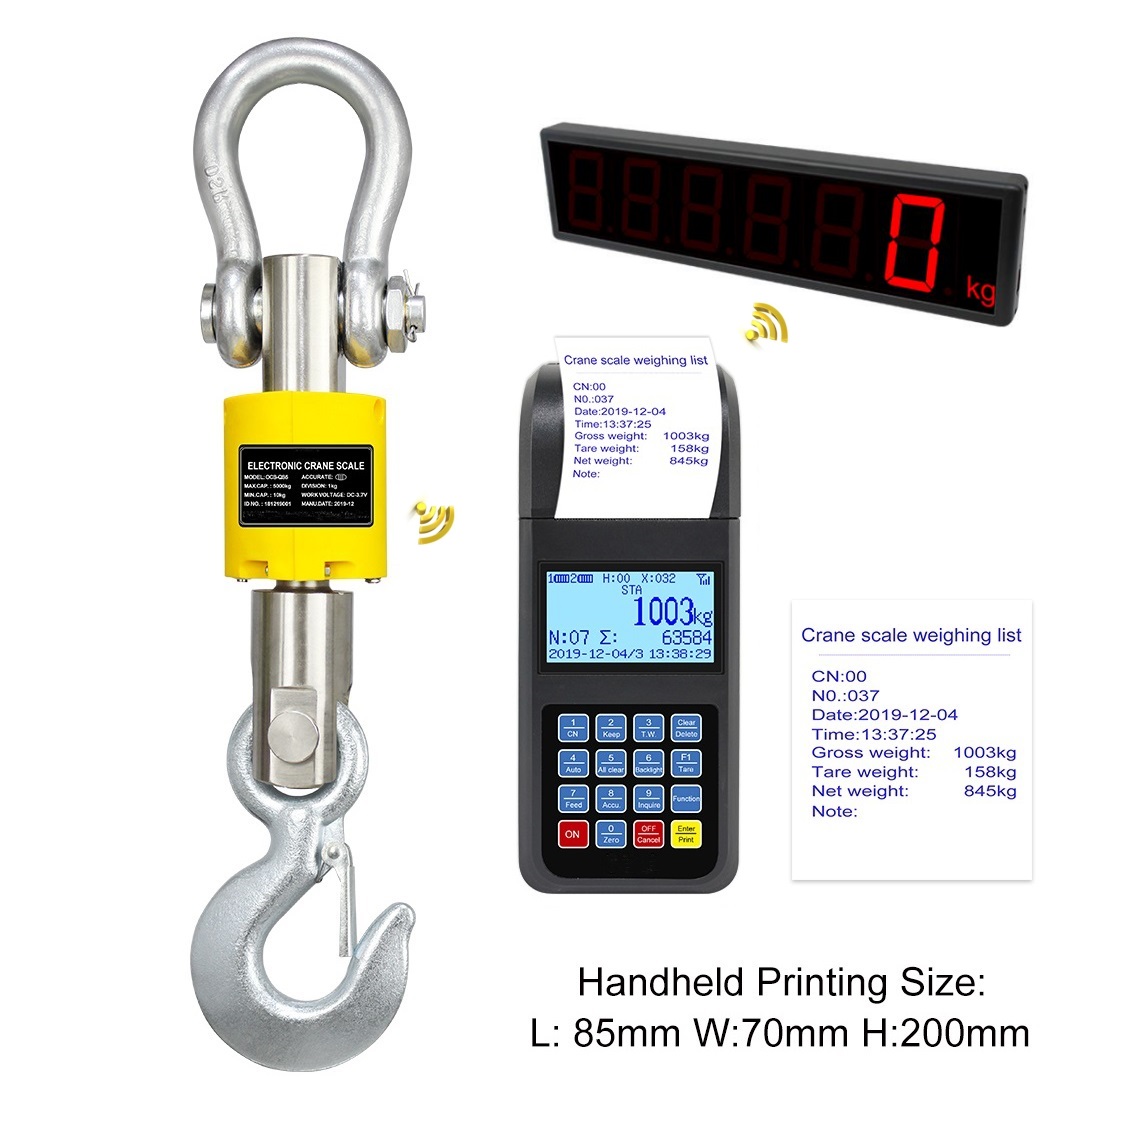 Electronic Digital Hanging Scale 2 Ton OCS Crane Scale for Heavy Duty Weighing